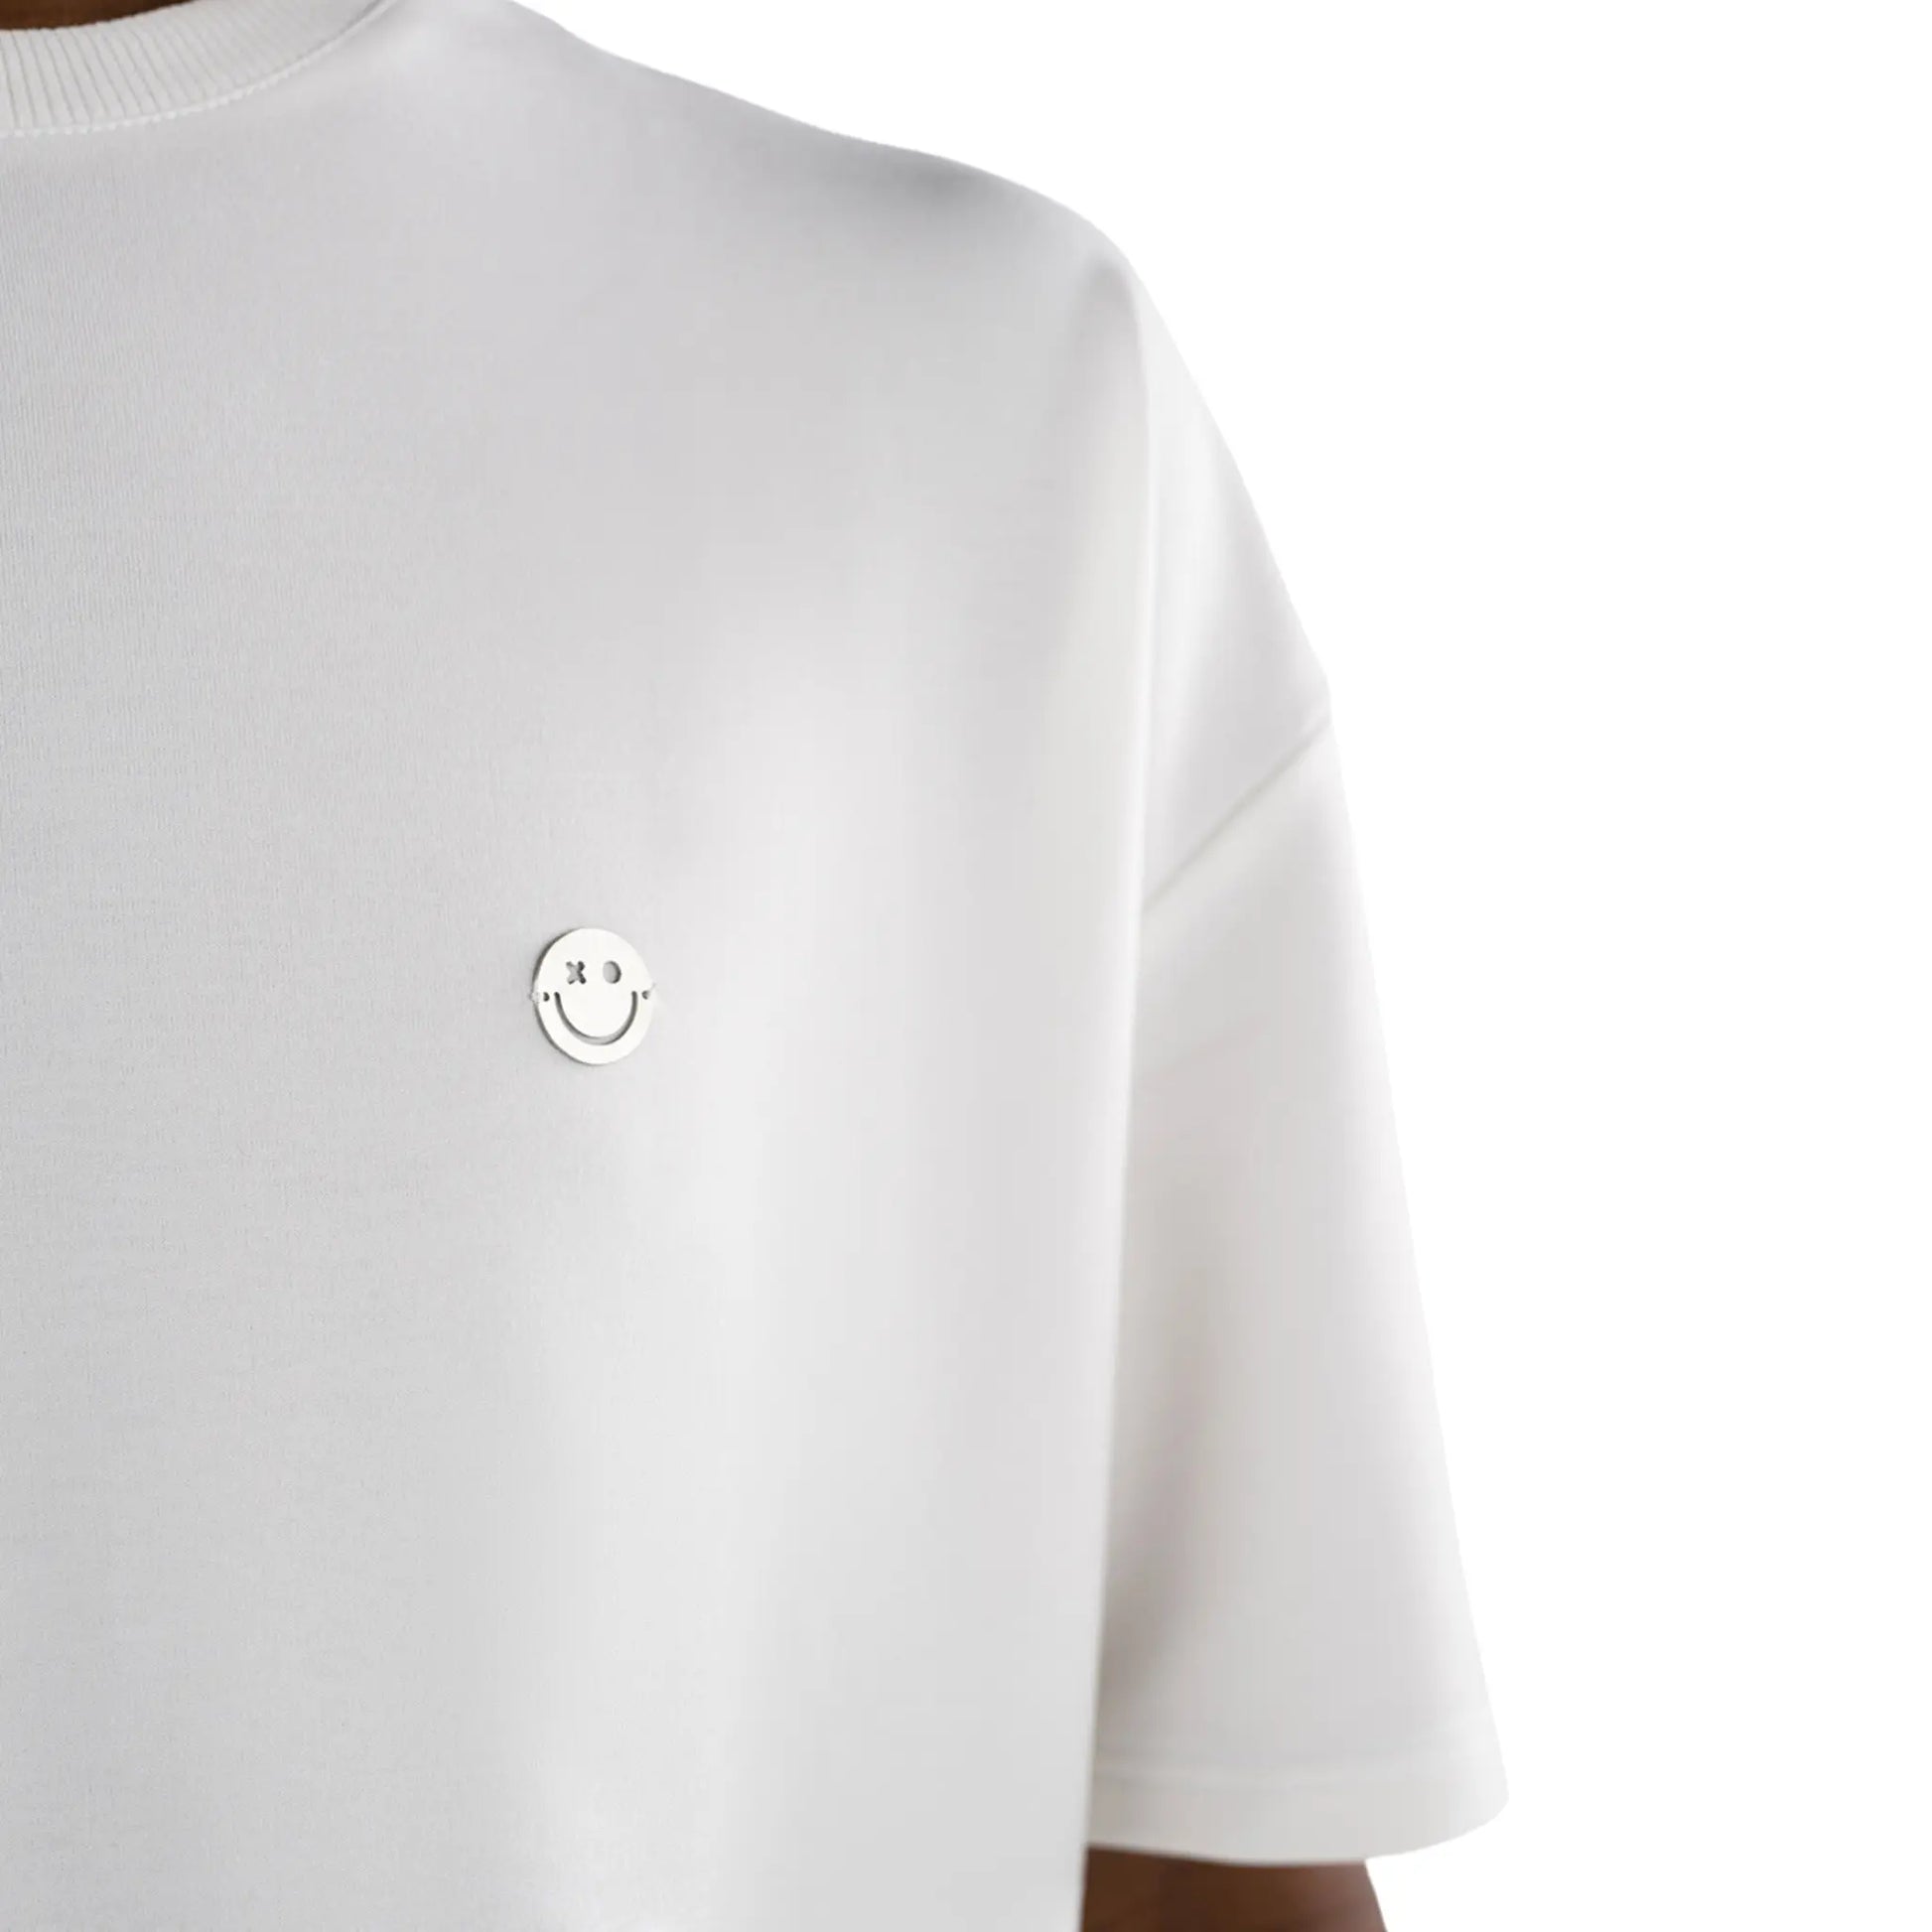 Oversized T-shirt White close up view on smiley logo